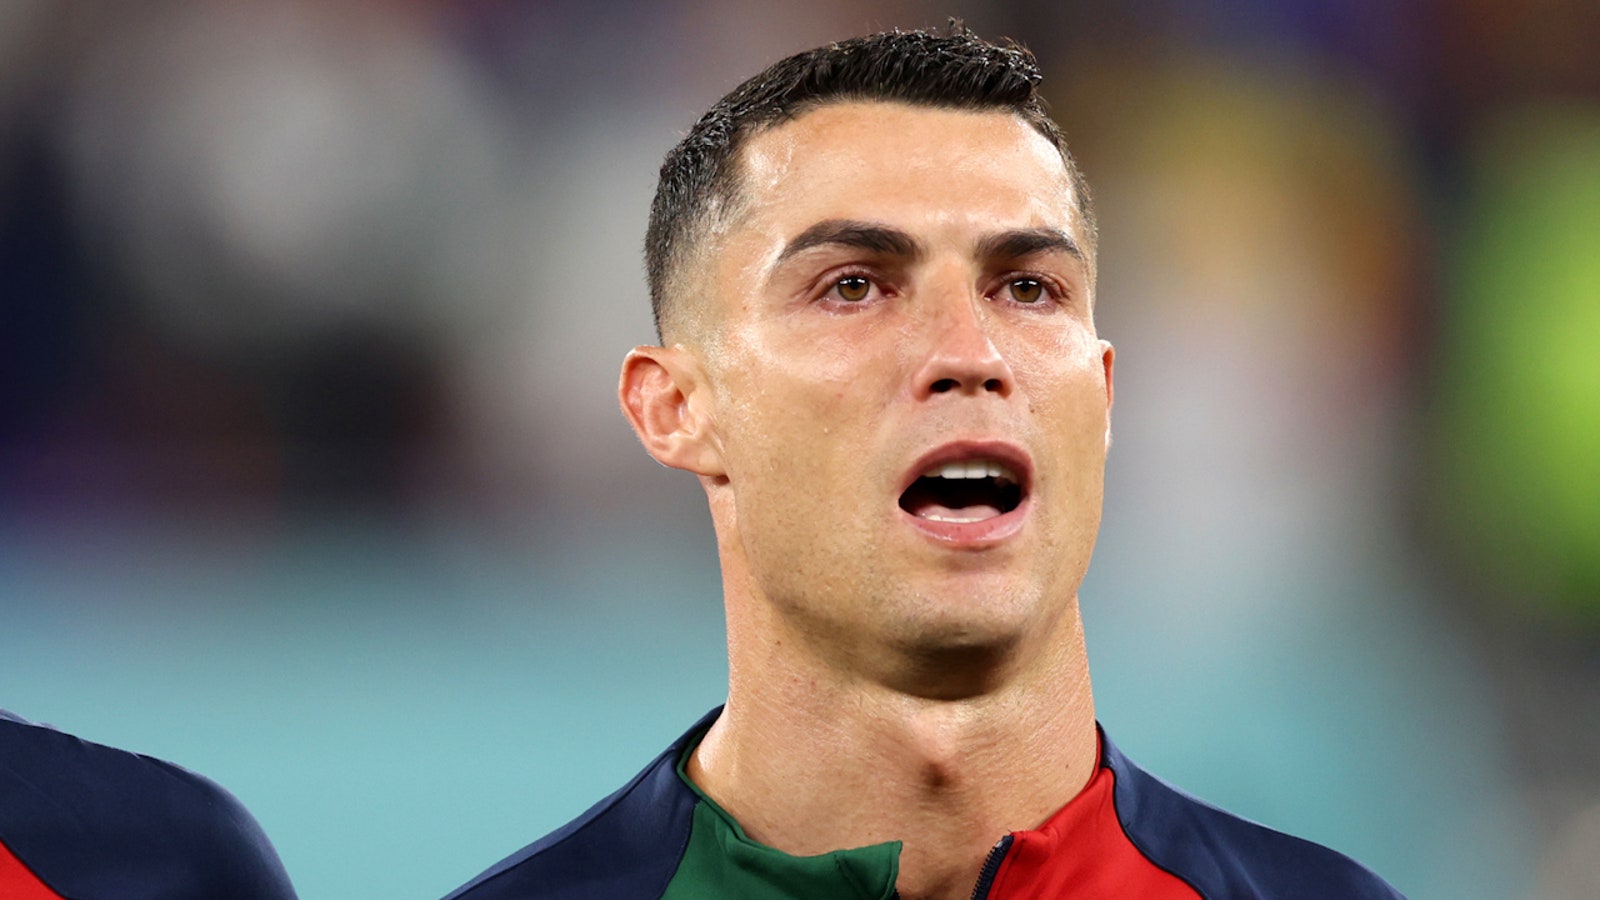 Cristiano Ronaldo broke down in tears during Portugal's national anthem